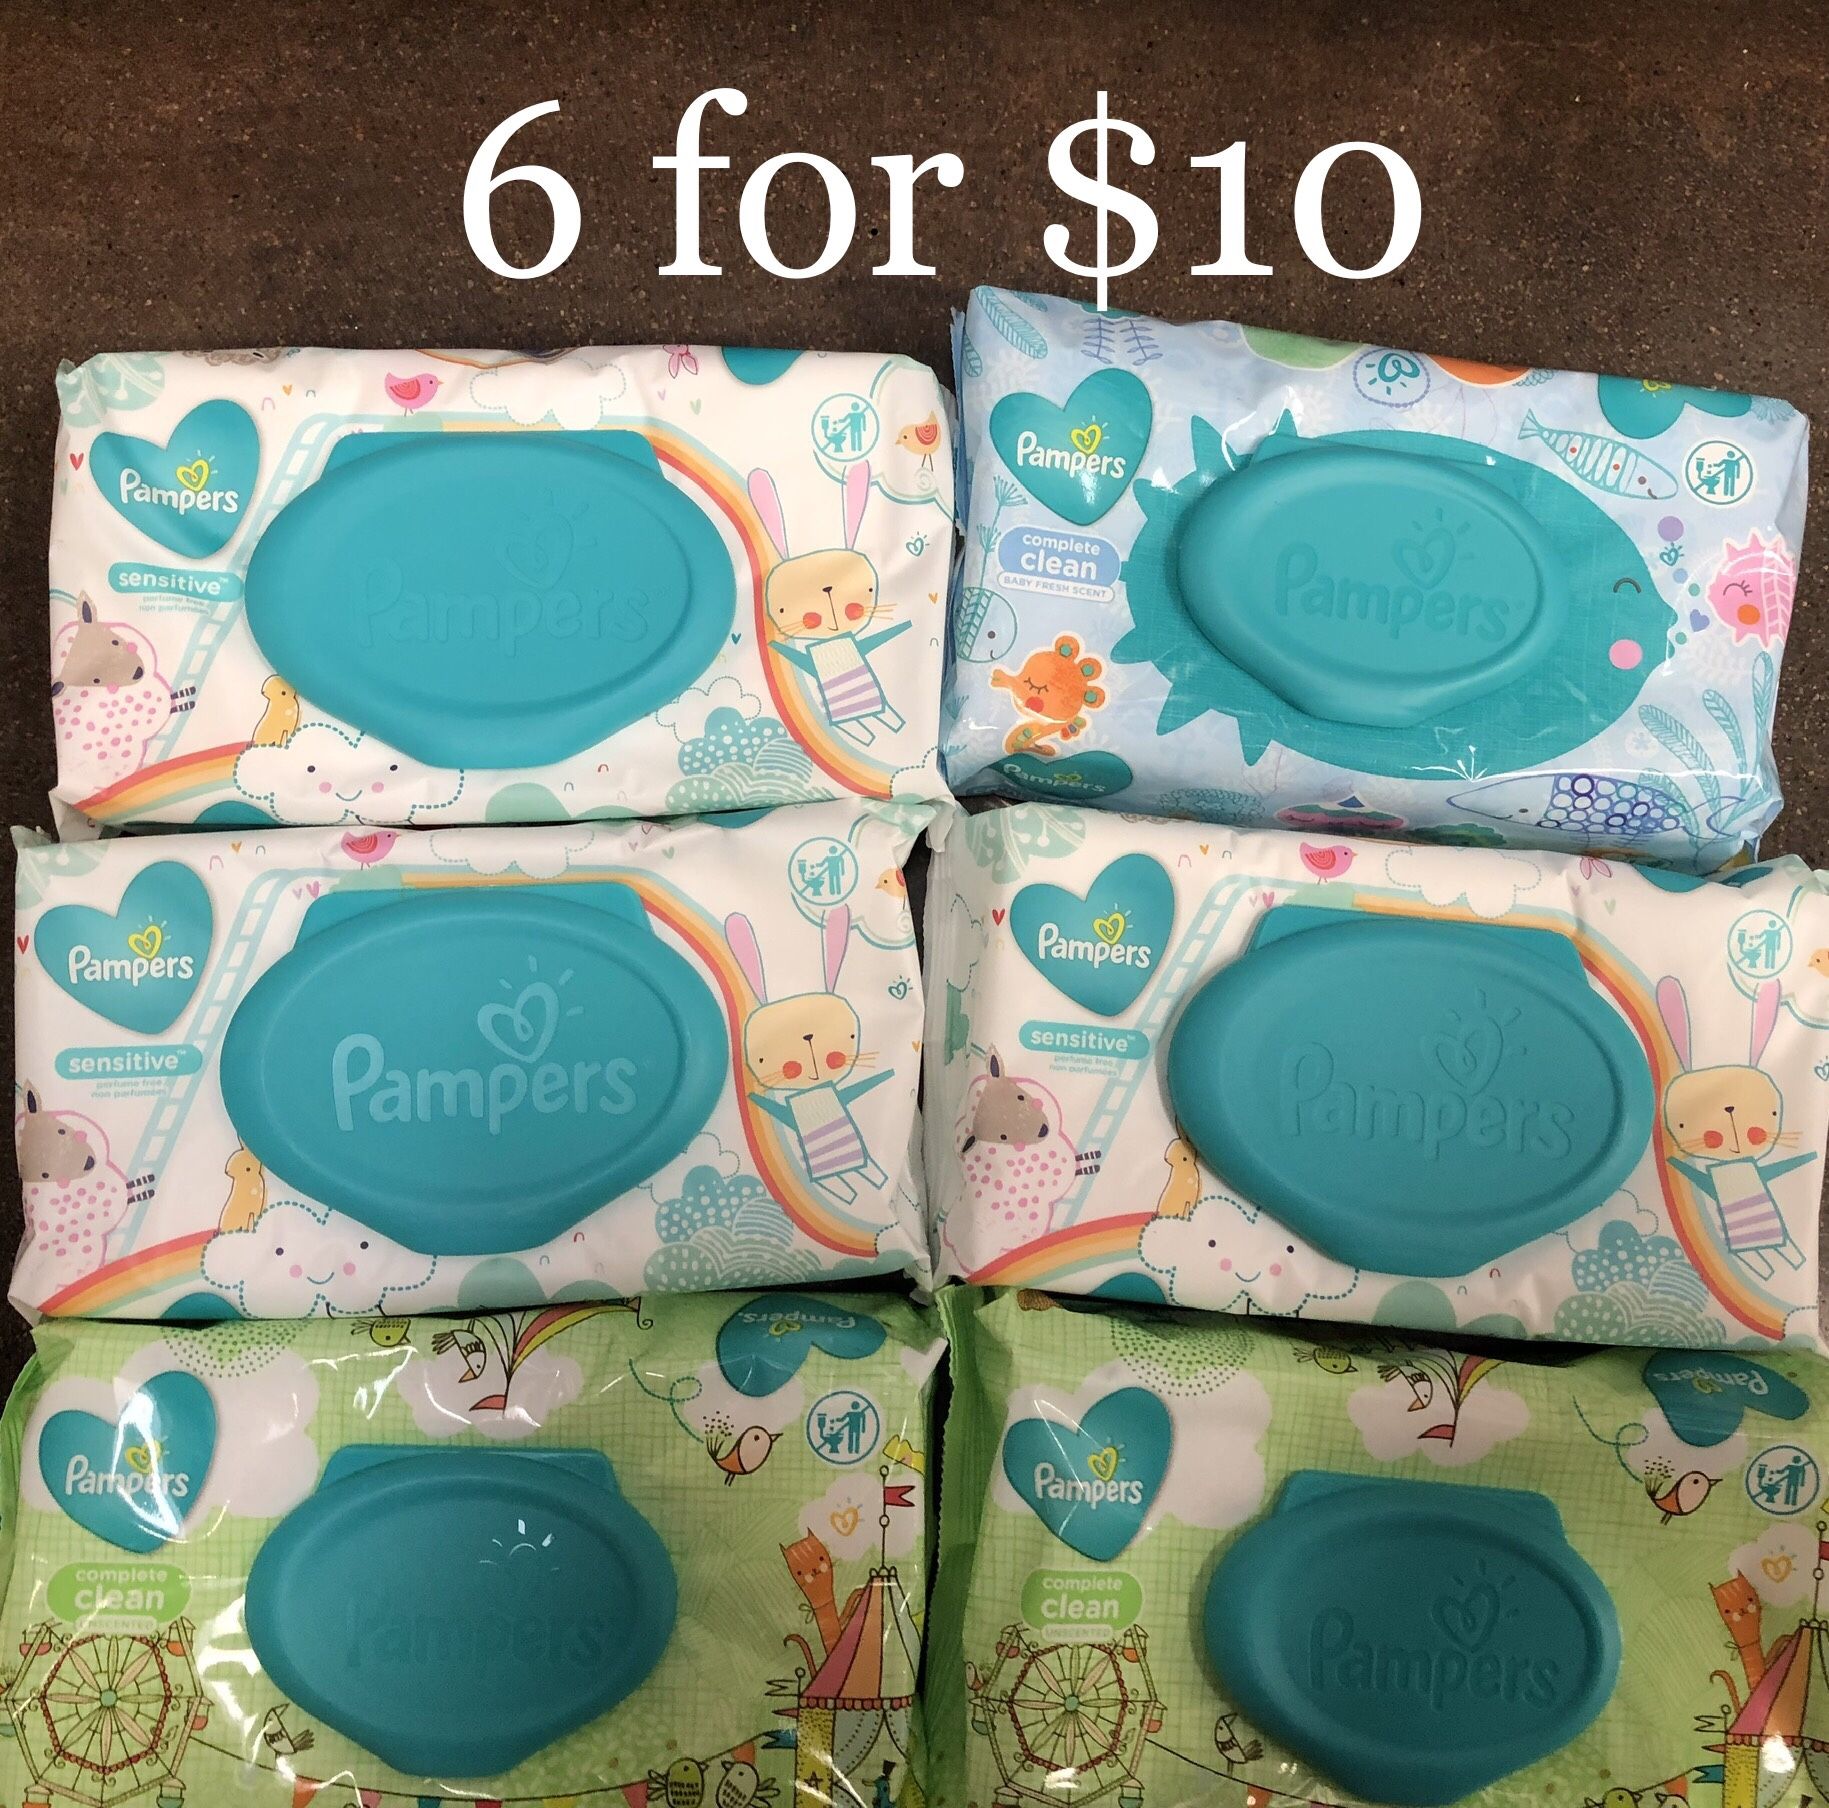 Pampers Wet Wipes (72 ct x 6 = 432 total wipes) Unscented 6 for $10